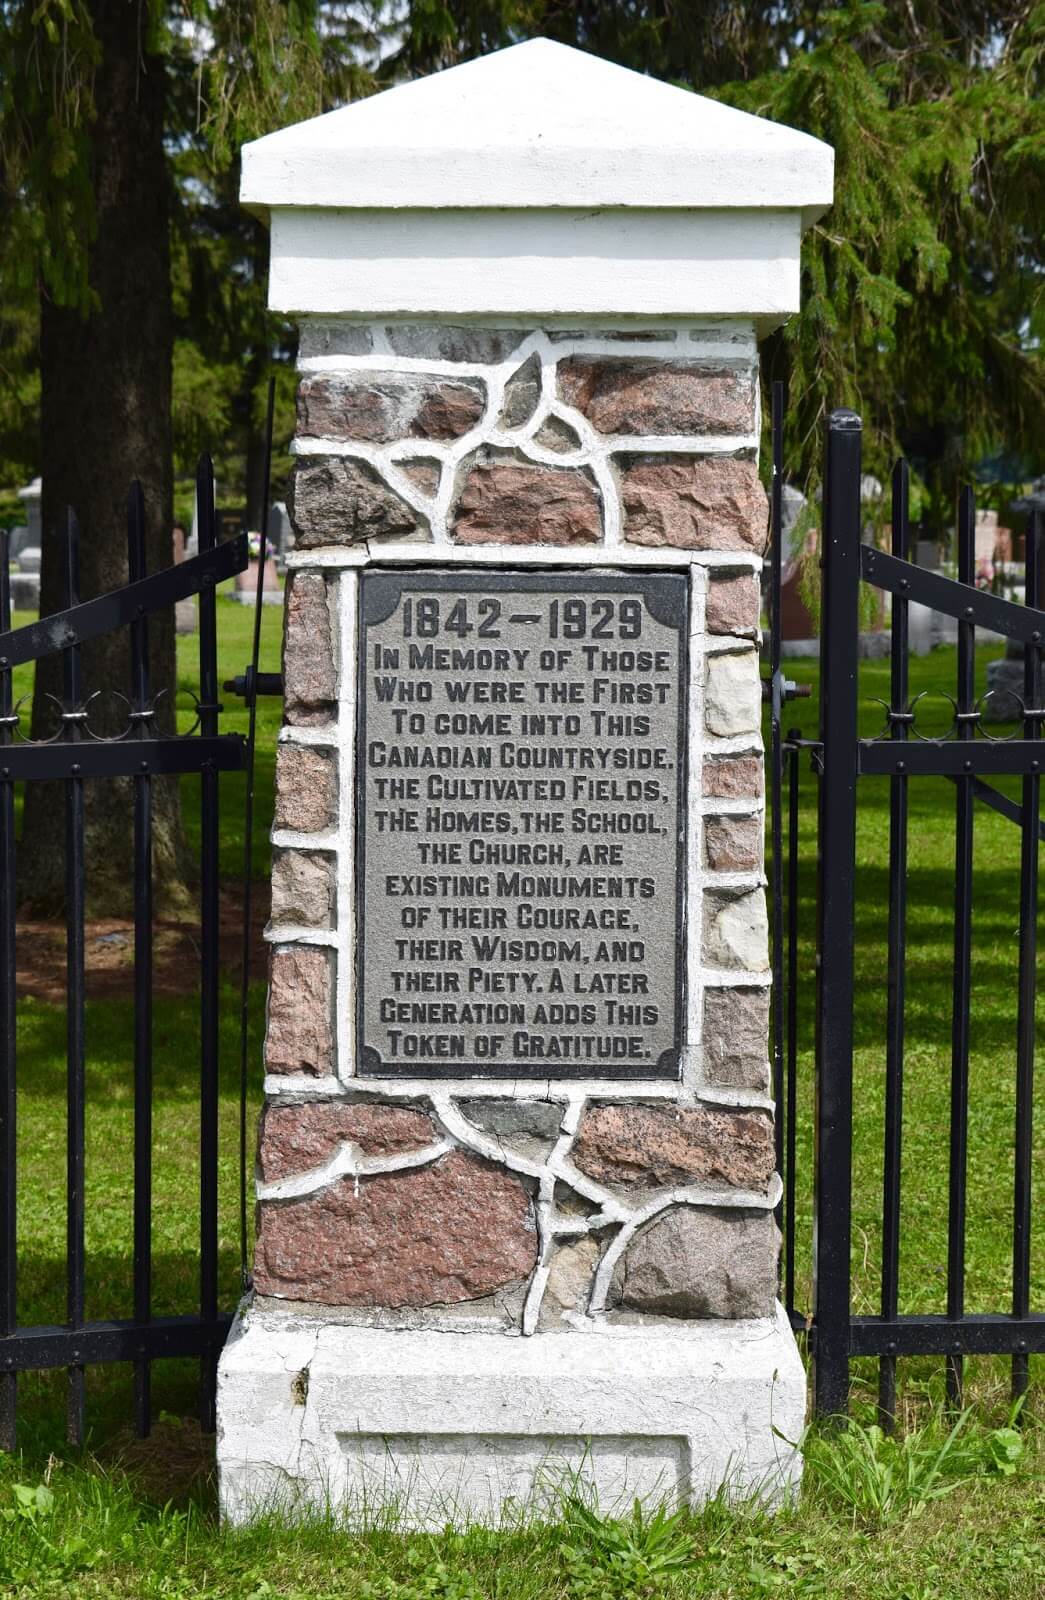 A plaque stating 1842-1929, In memory of those who were the first to come into this Canadian countryside. The cultivated fields, the homes, the school, the church, are existing monuments of their courage, their wisdom, and their piety. A later generation adds this token of gratitude.